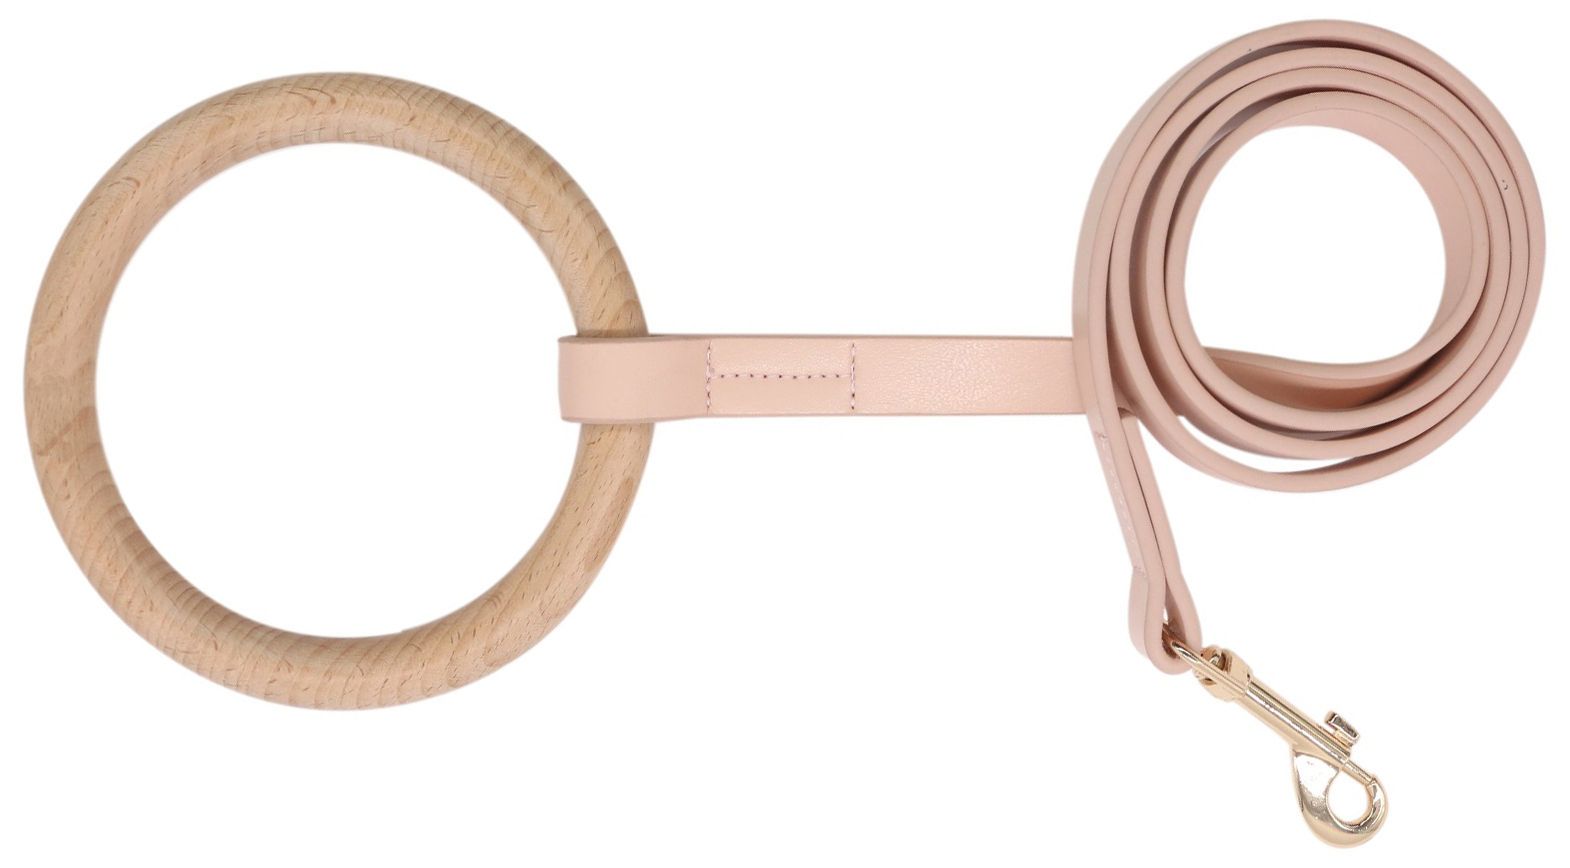 Pet Life ® 'Ever-Craft' Boutique Series Beechwood And Leather Designer Dog Leash - One Size - Pink